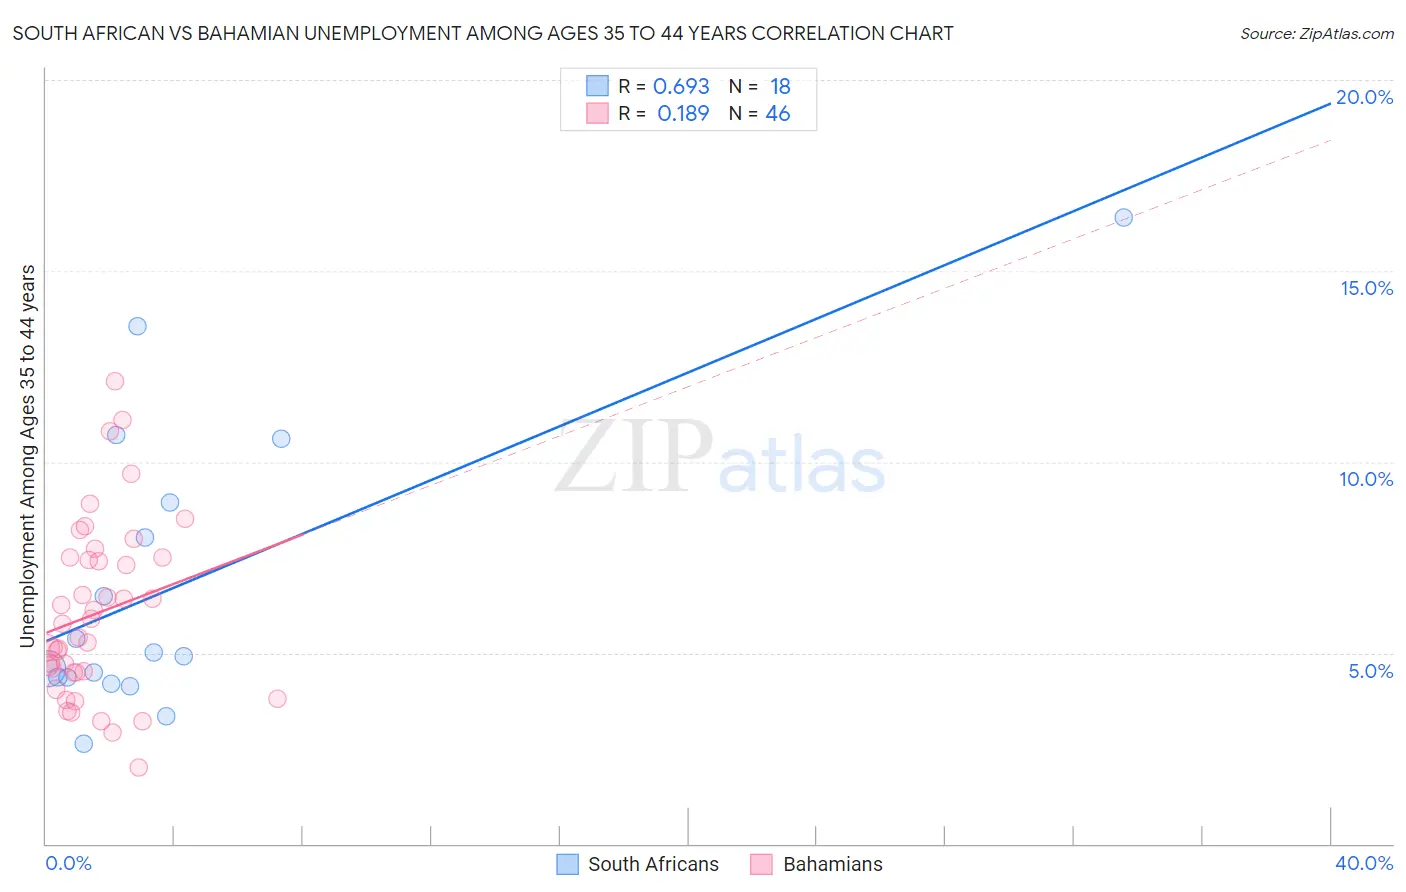 South African vs Bahamian Unemployment Among Ages 35 to 44 years